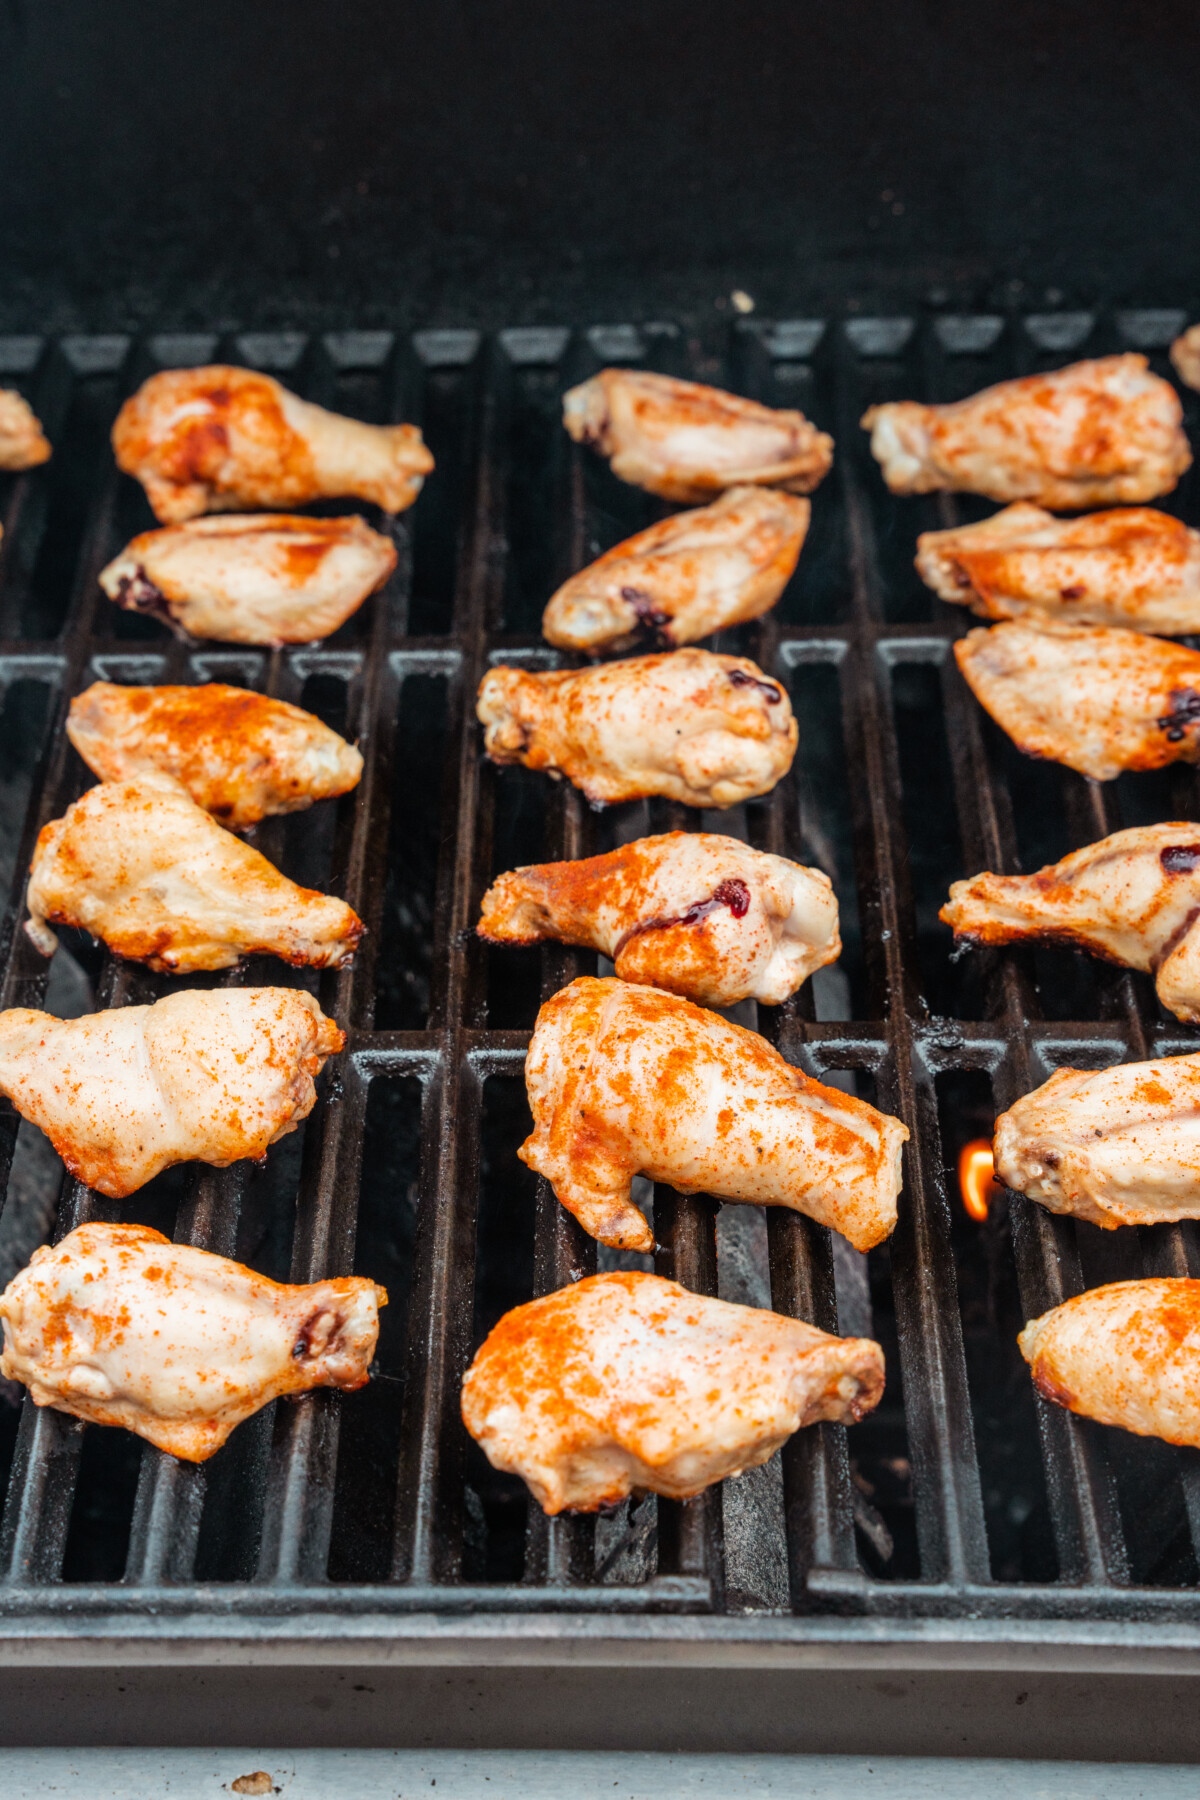 Chicken wings bring grilled.